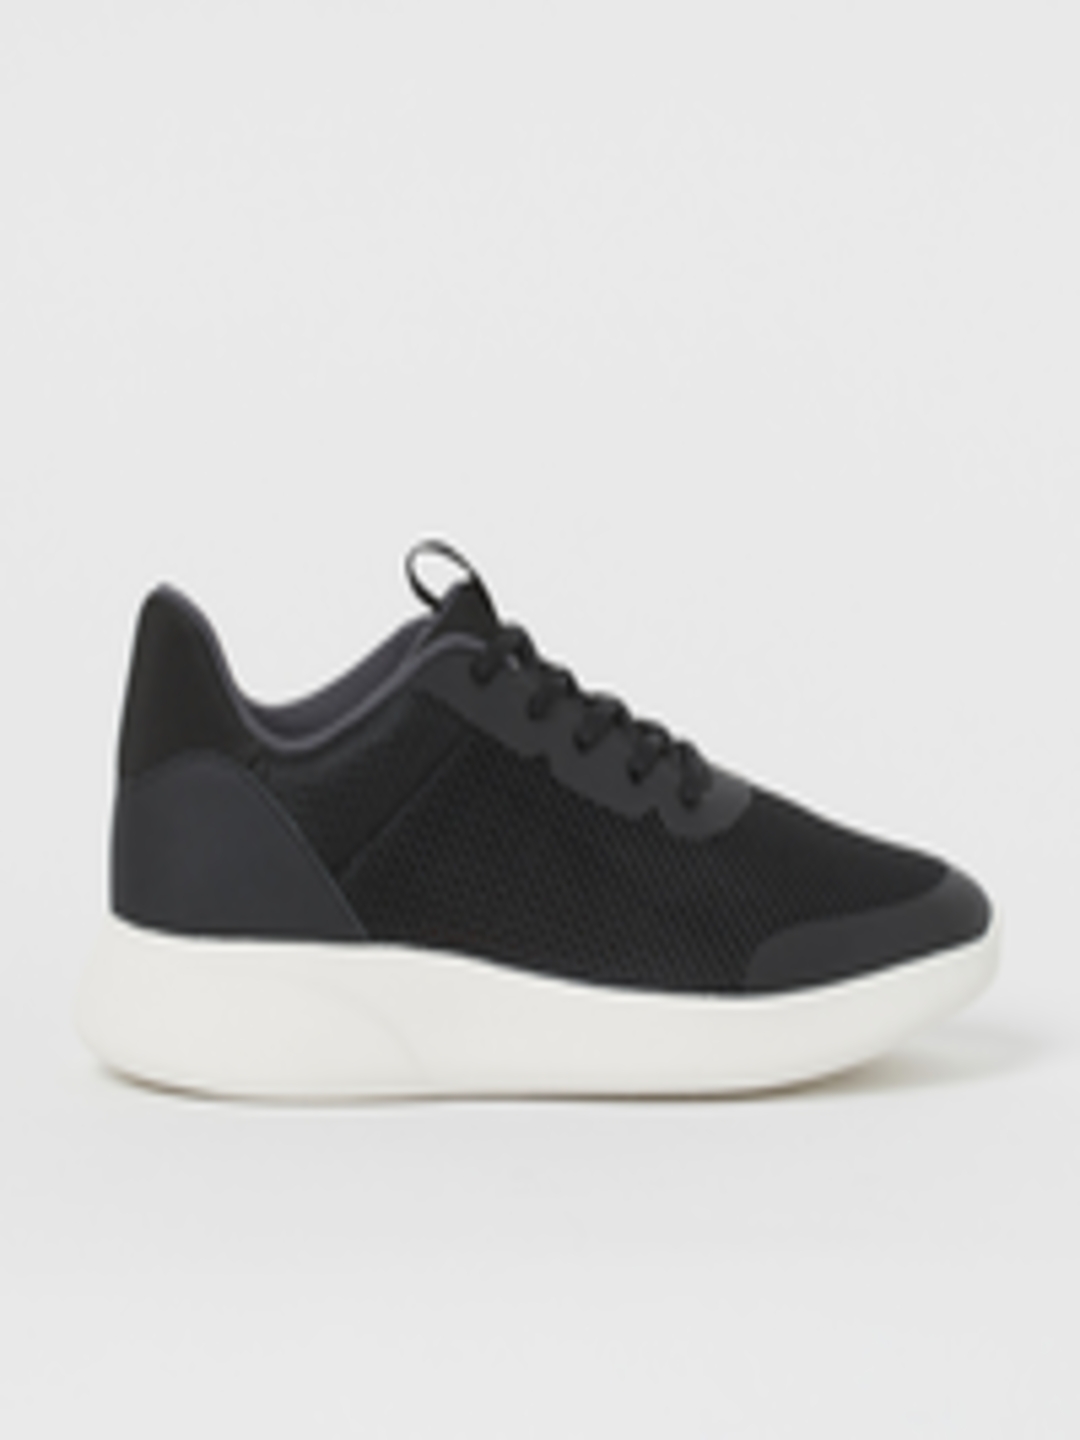 Buy H&M Men Black Mesh Trainers - Casual Shoes for Men 11655044 | Myntra